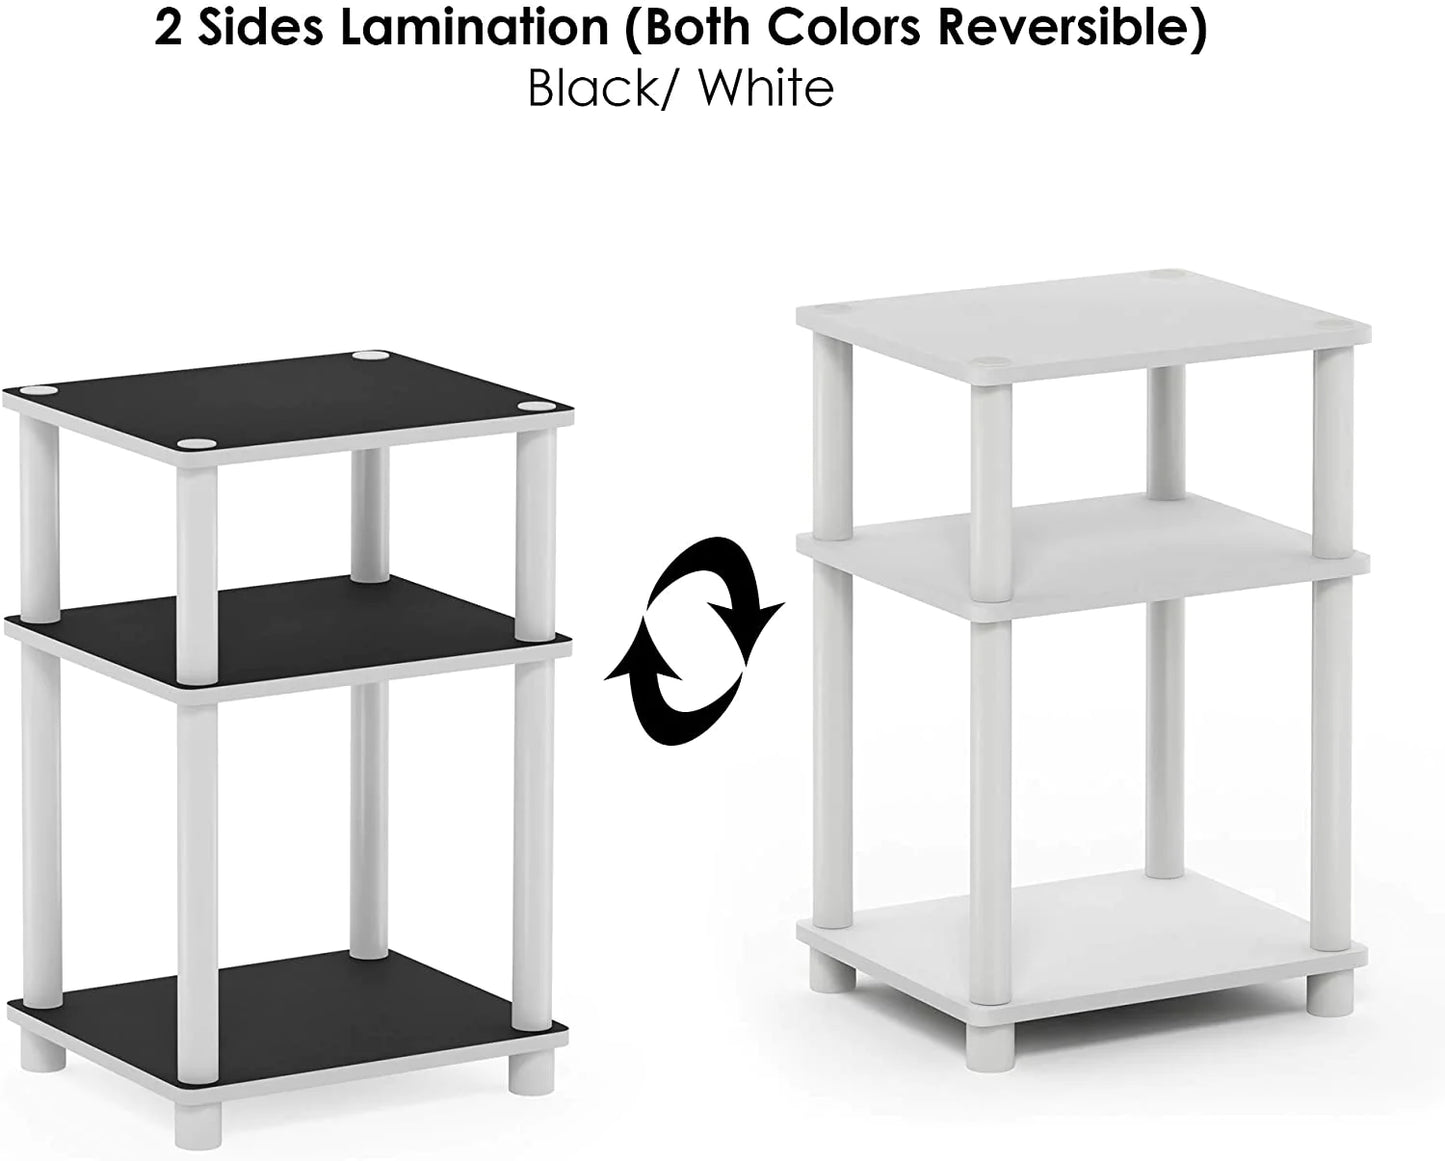 Side Tables: Just 3-Tier End Table, 1-Pack